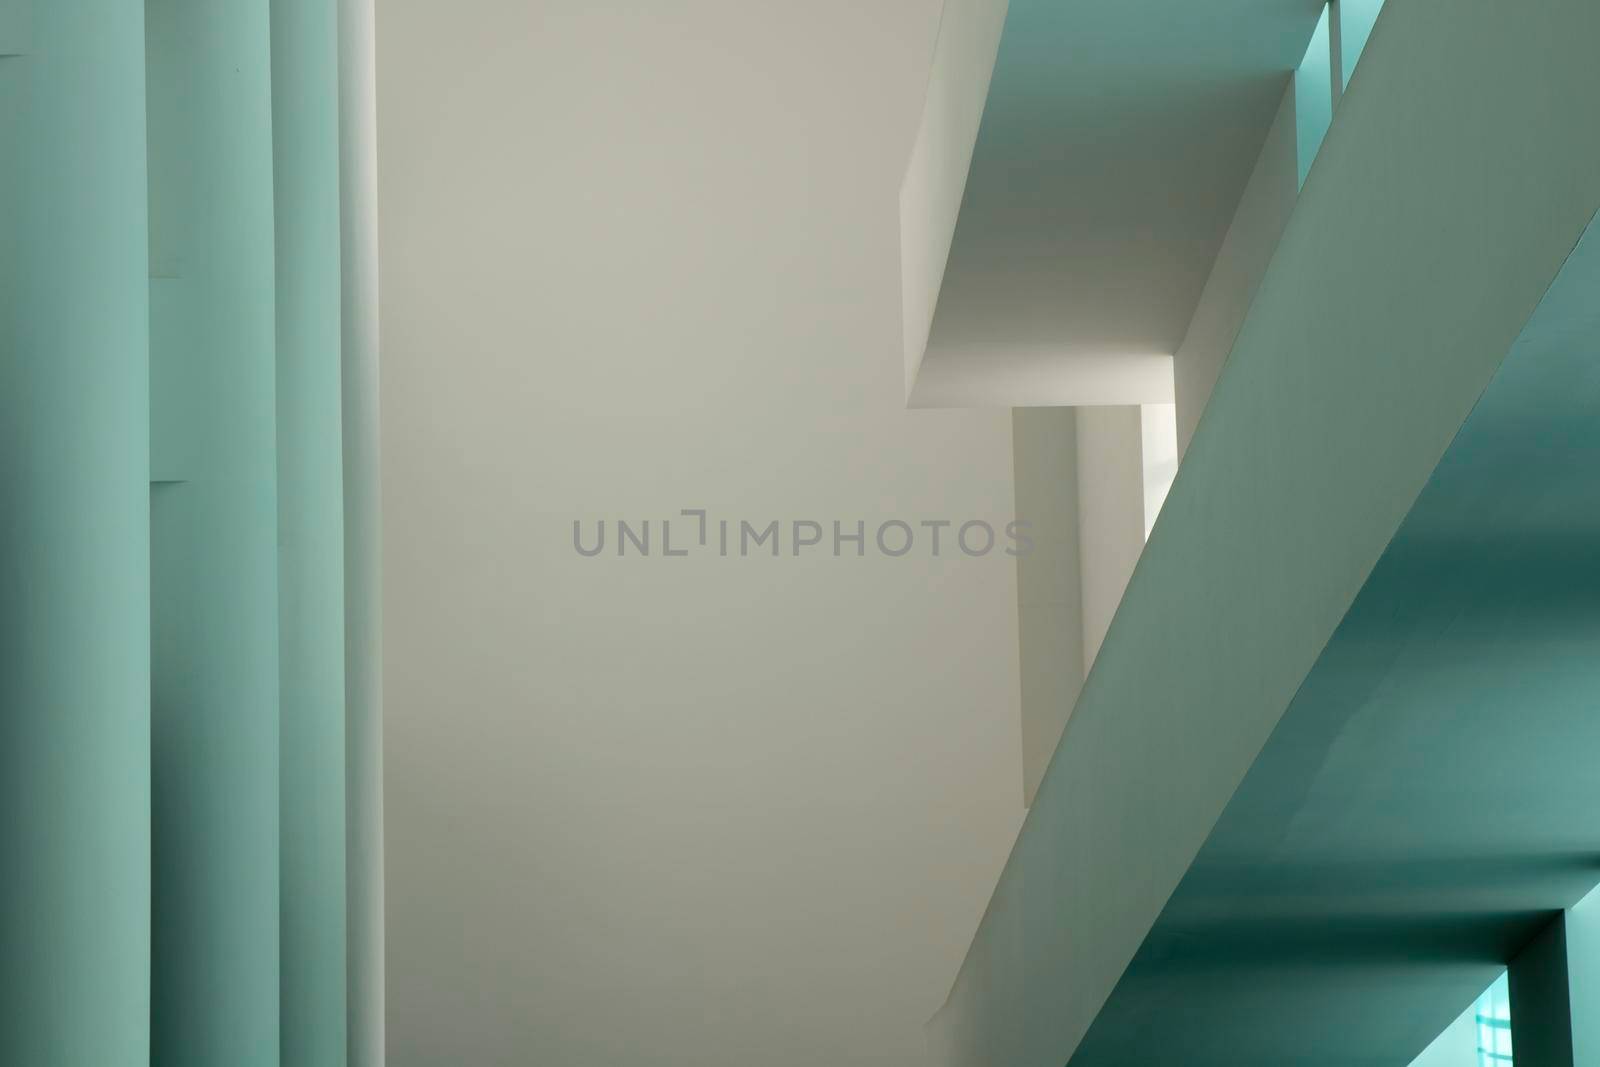 Minimalistic picture showing geometric shapes in a modern style museum